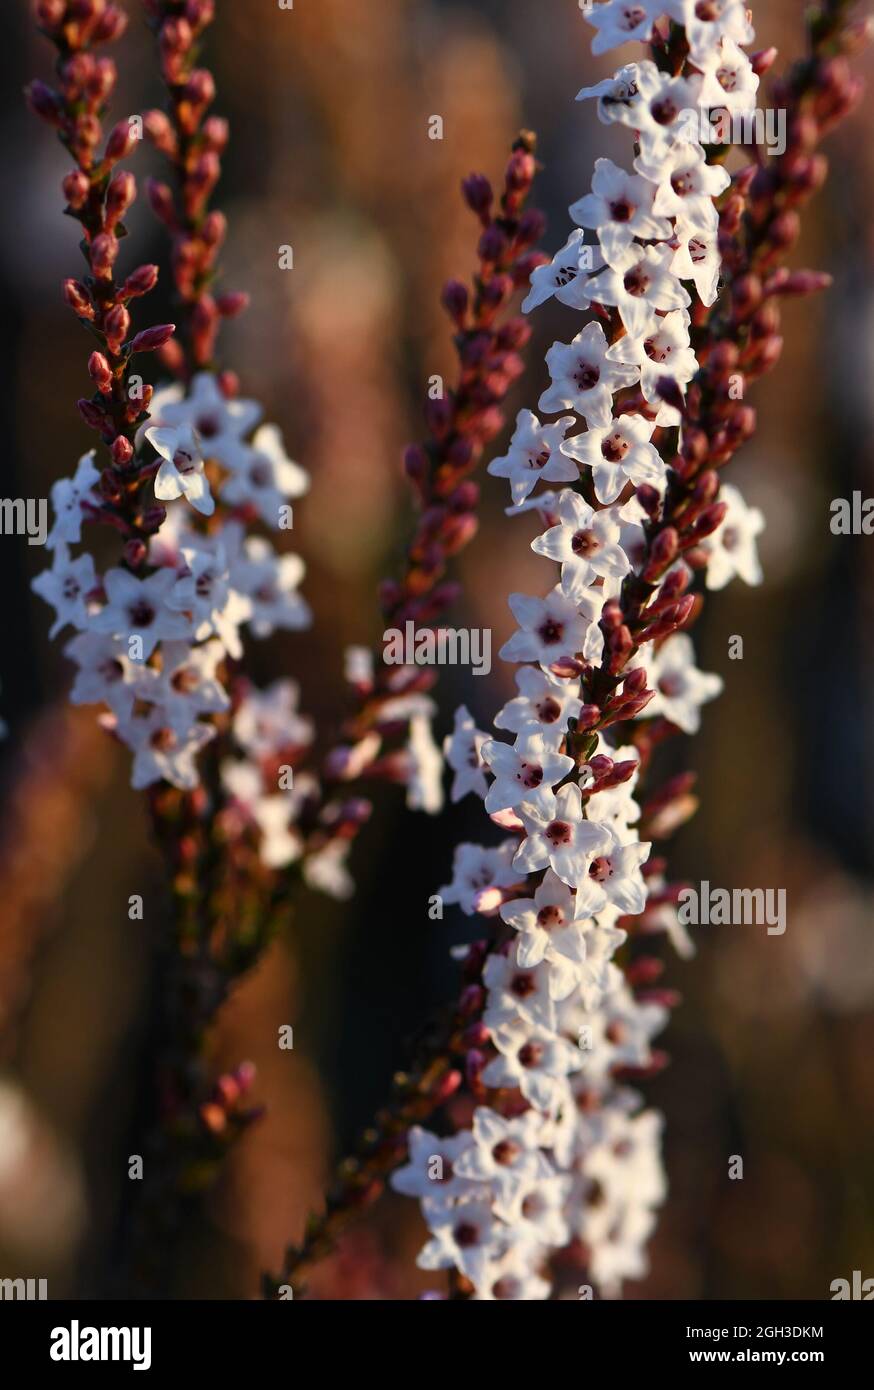 Pink and white flowers and buds of the Australian native Coast Coral Heath, Epacris microphylla, family Ericaceae, in woodland, Sydney, Australia Stock Photo